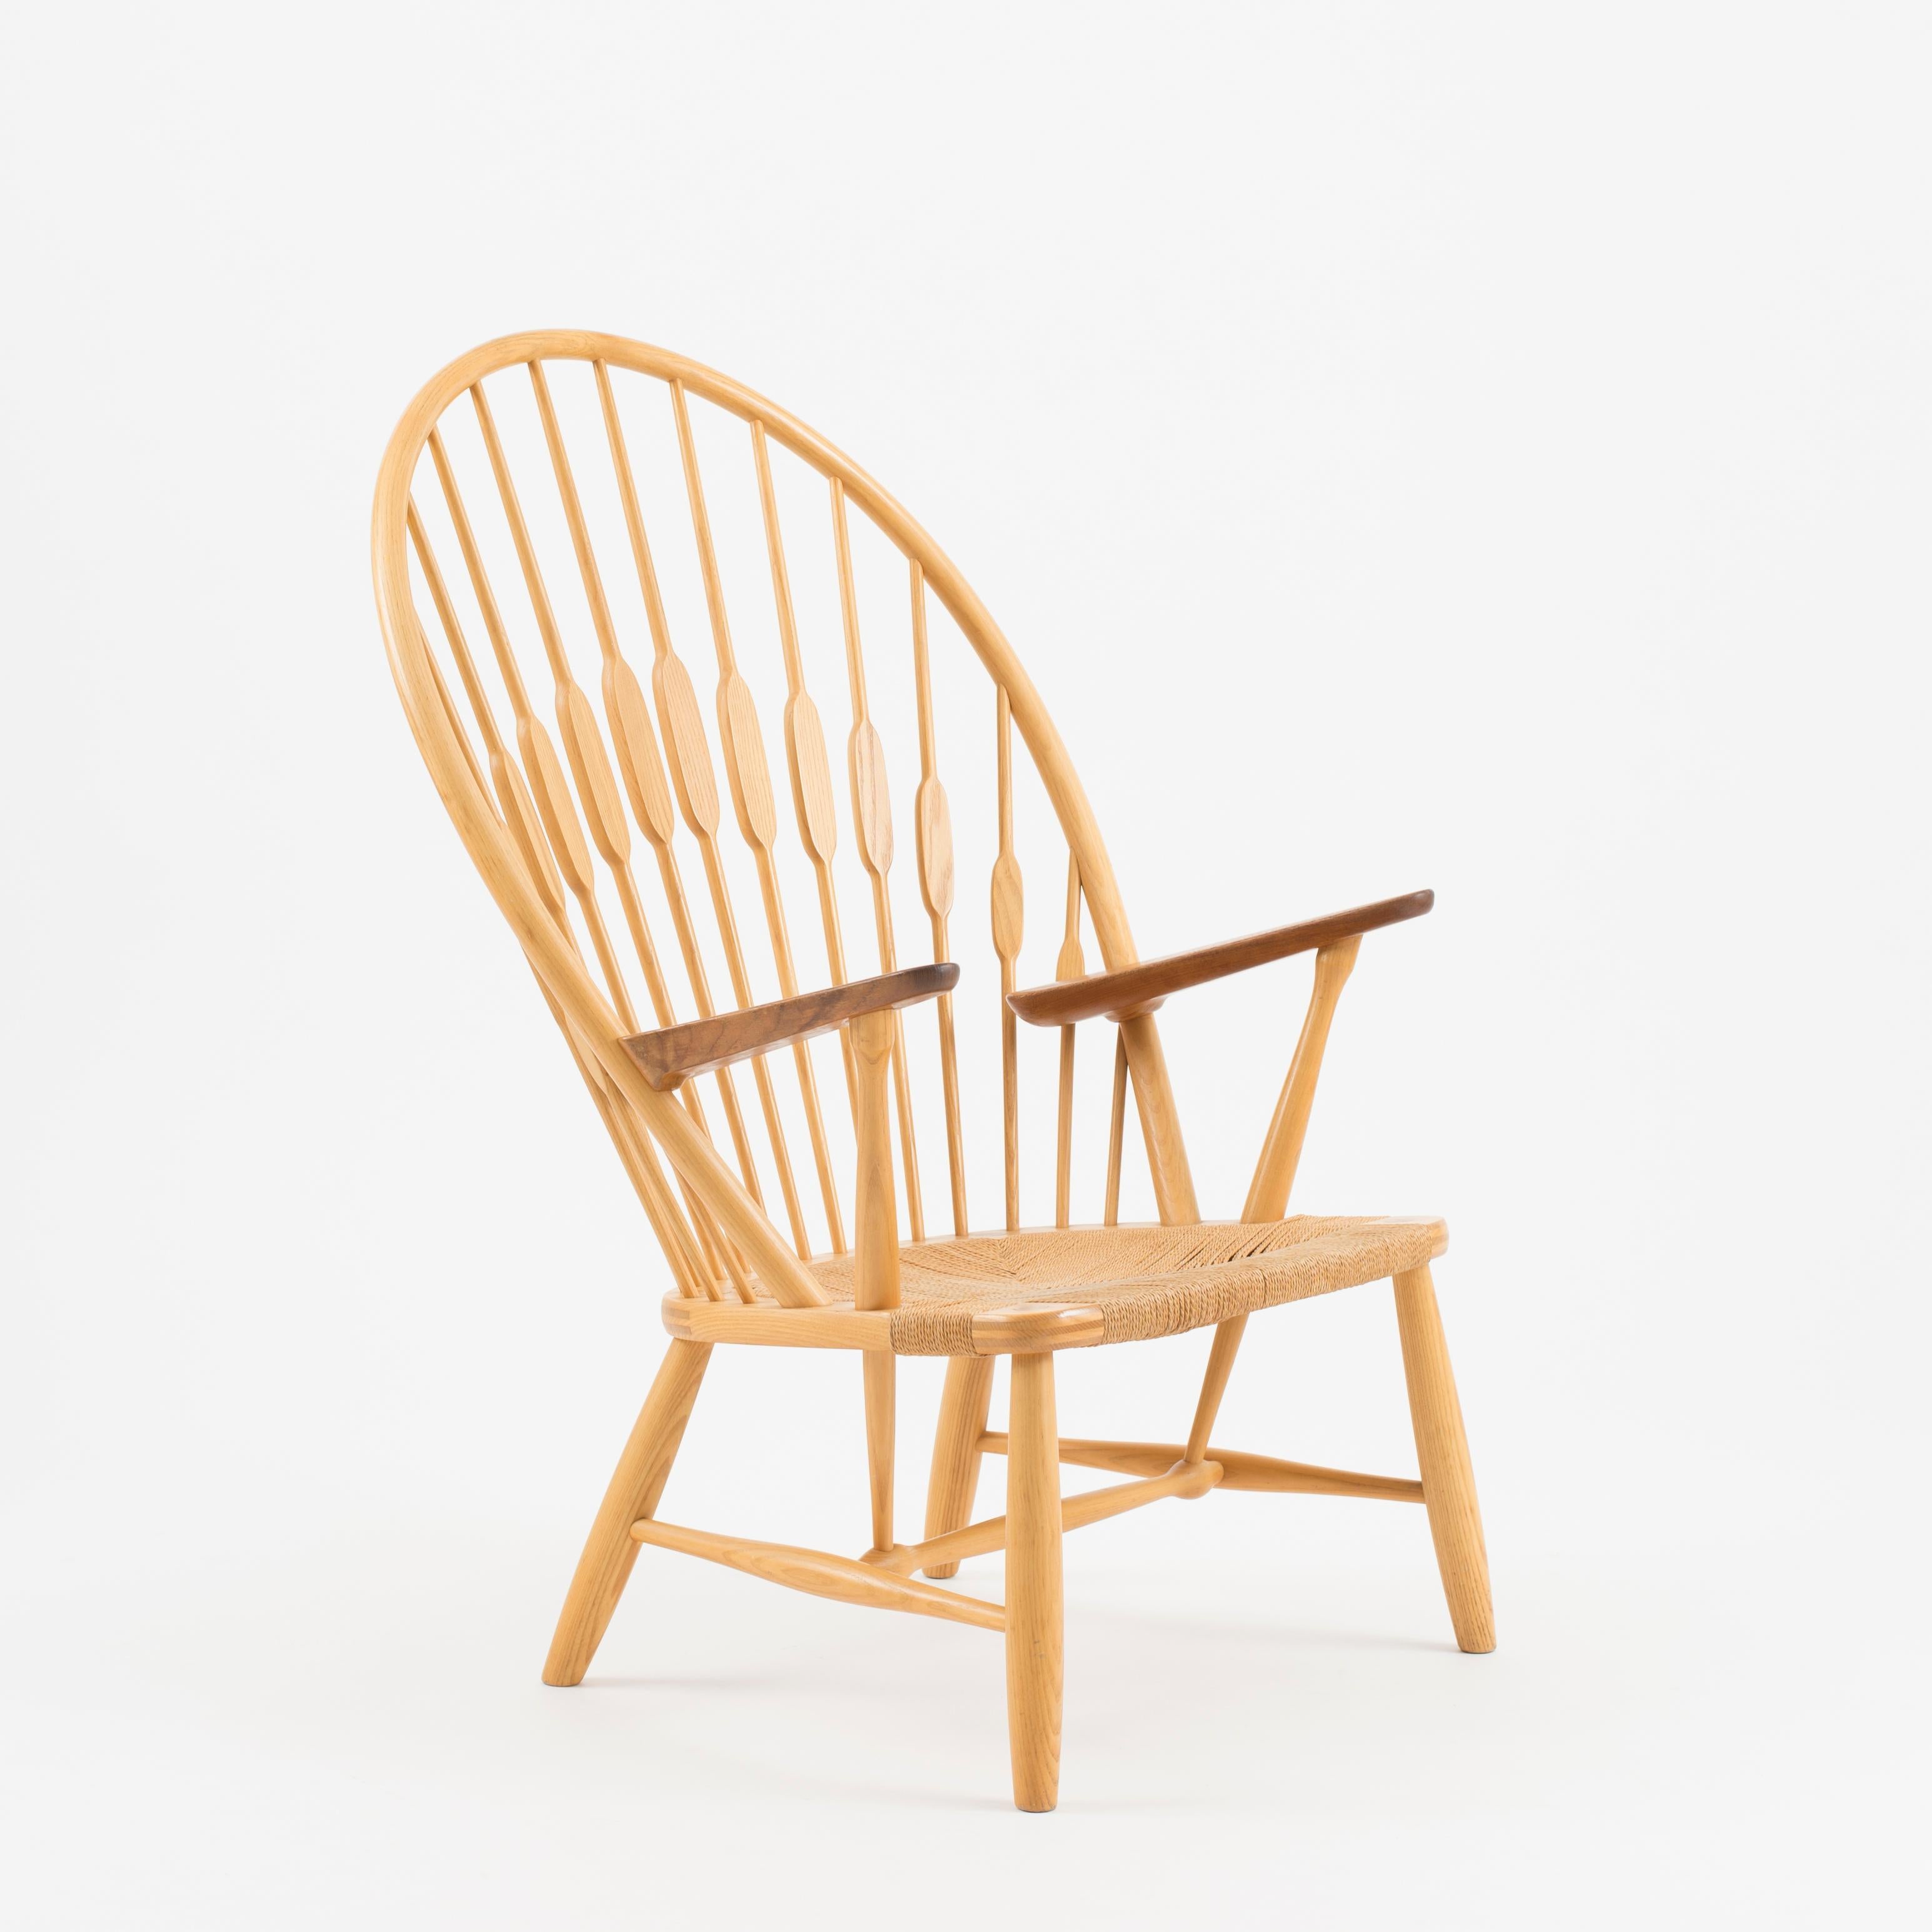 Hans J. Wegner “Peacock Chair”. An ashwood easy chair with teak armrests and woven papercord seat. Model JH 550. Executed and stamped by cabinetmaker Johannes Hansen.